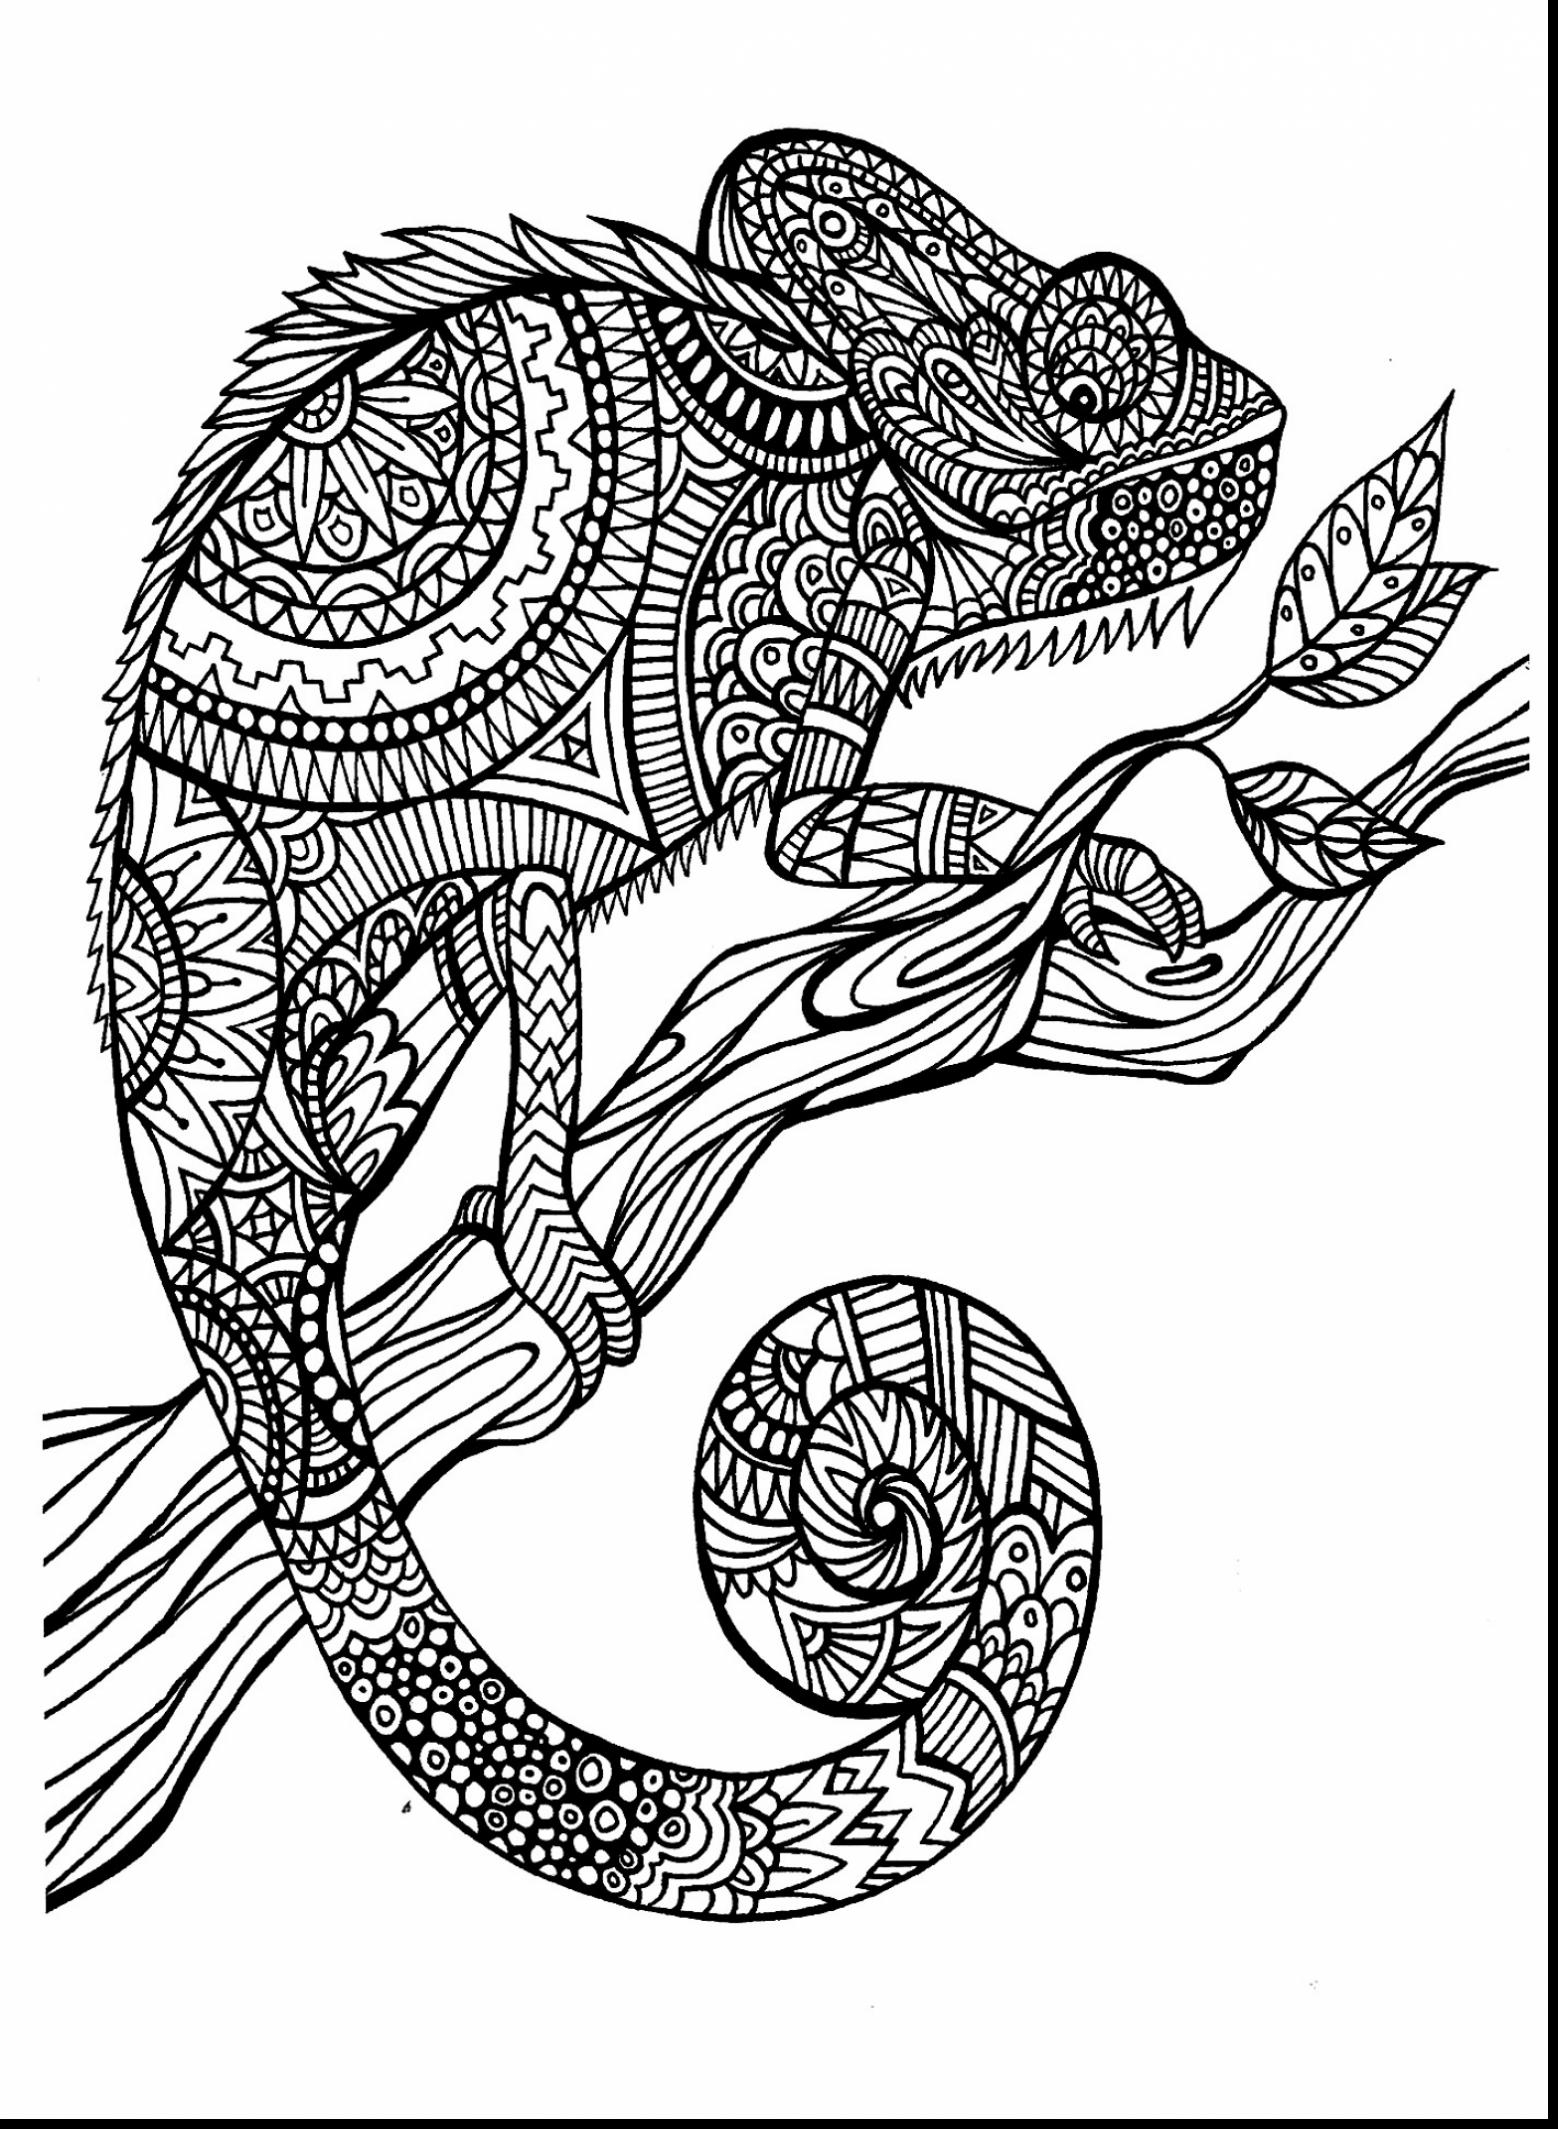 Coloring Pages Of Animals Hard Coloring Ideas 42 Coloring Pages Hard Animals Picture Ideas